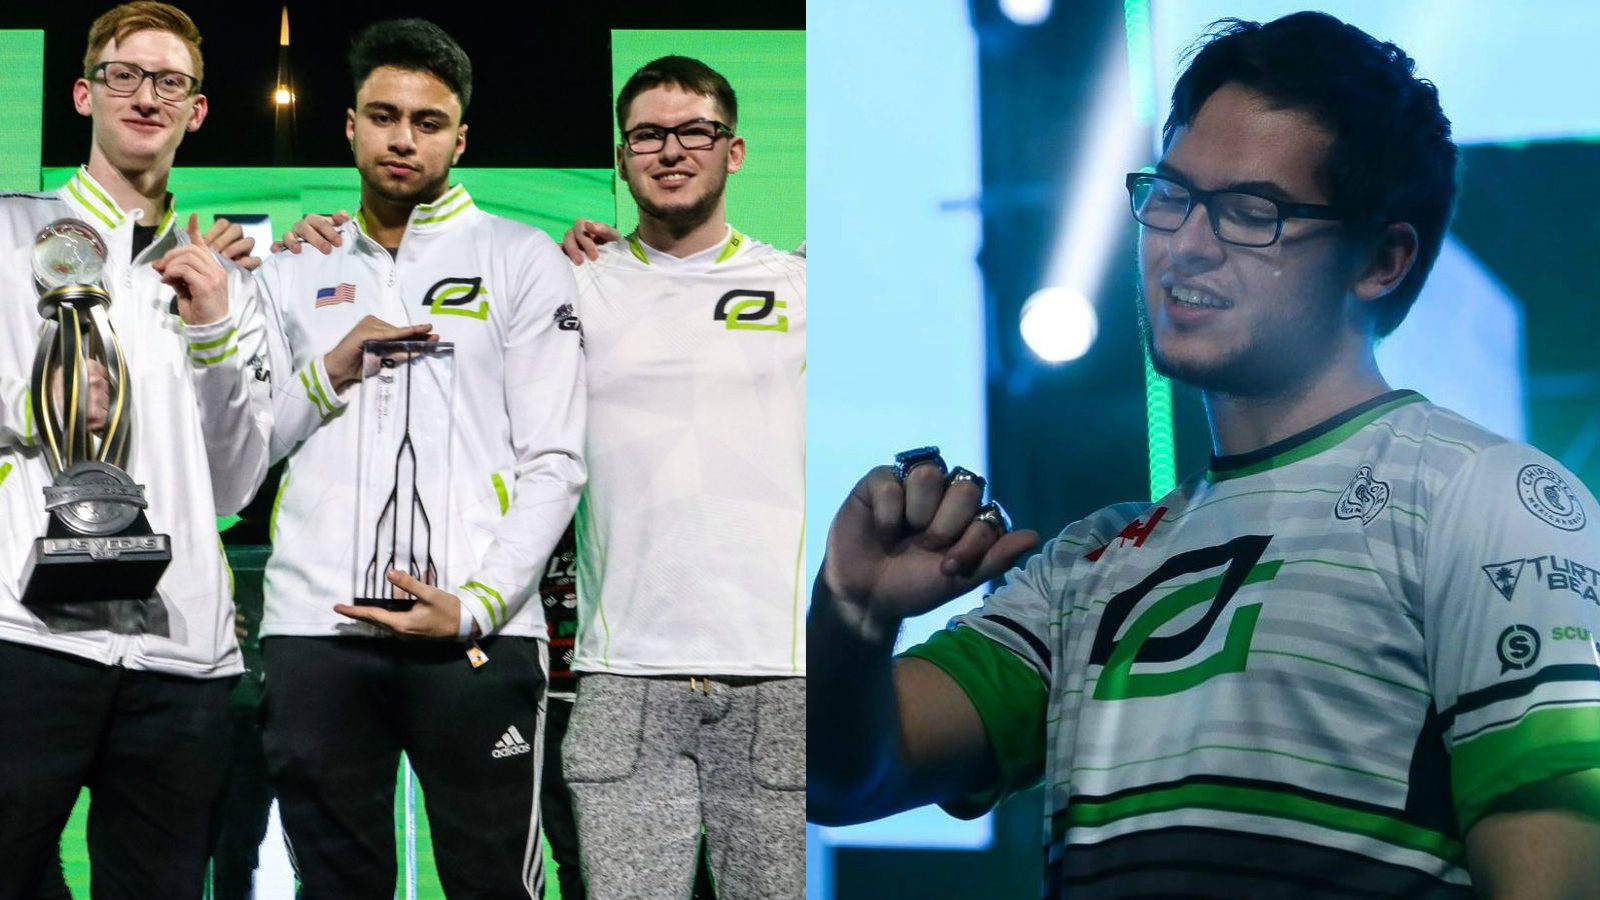 Karma casts doubt over current CoD team’s future with OpTic Gaming ...